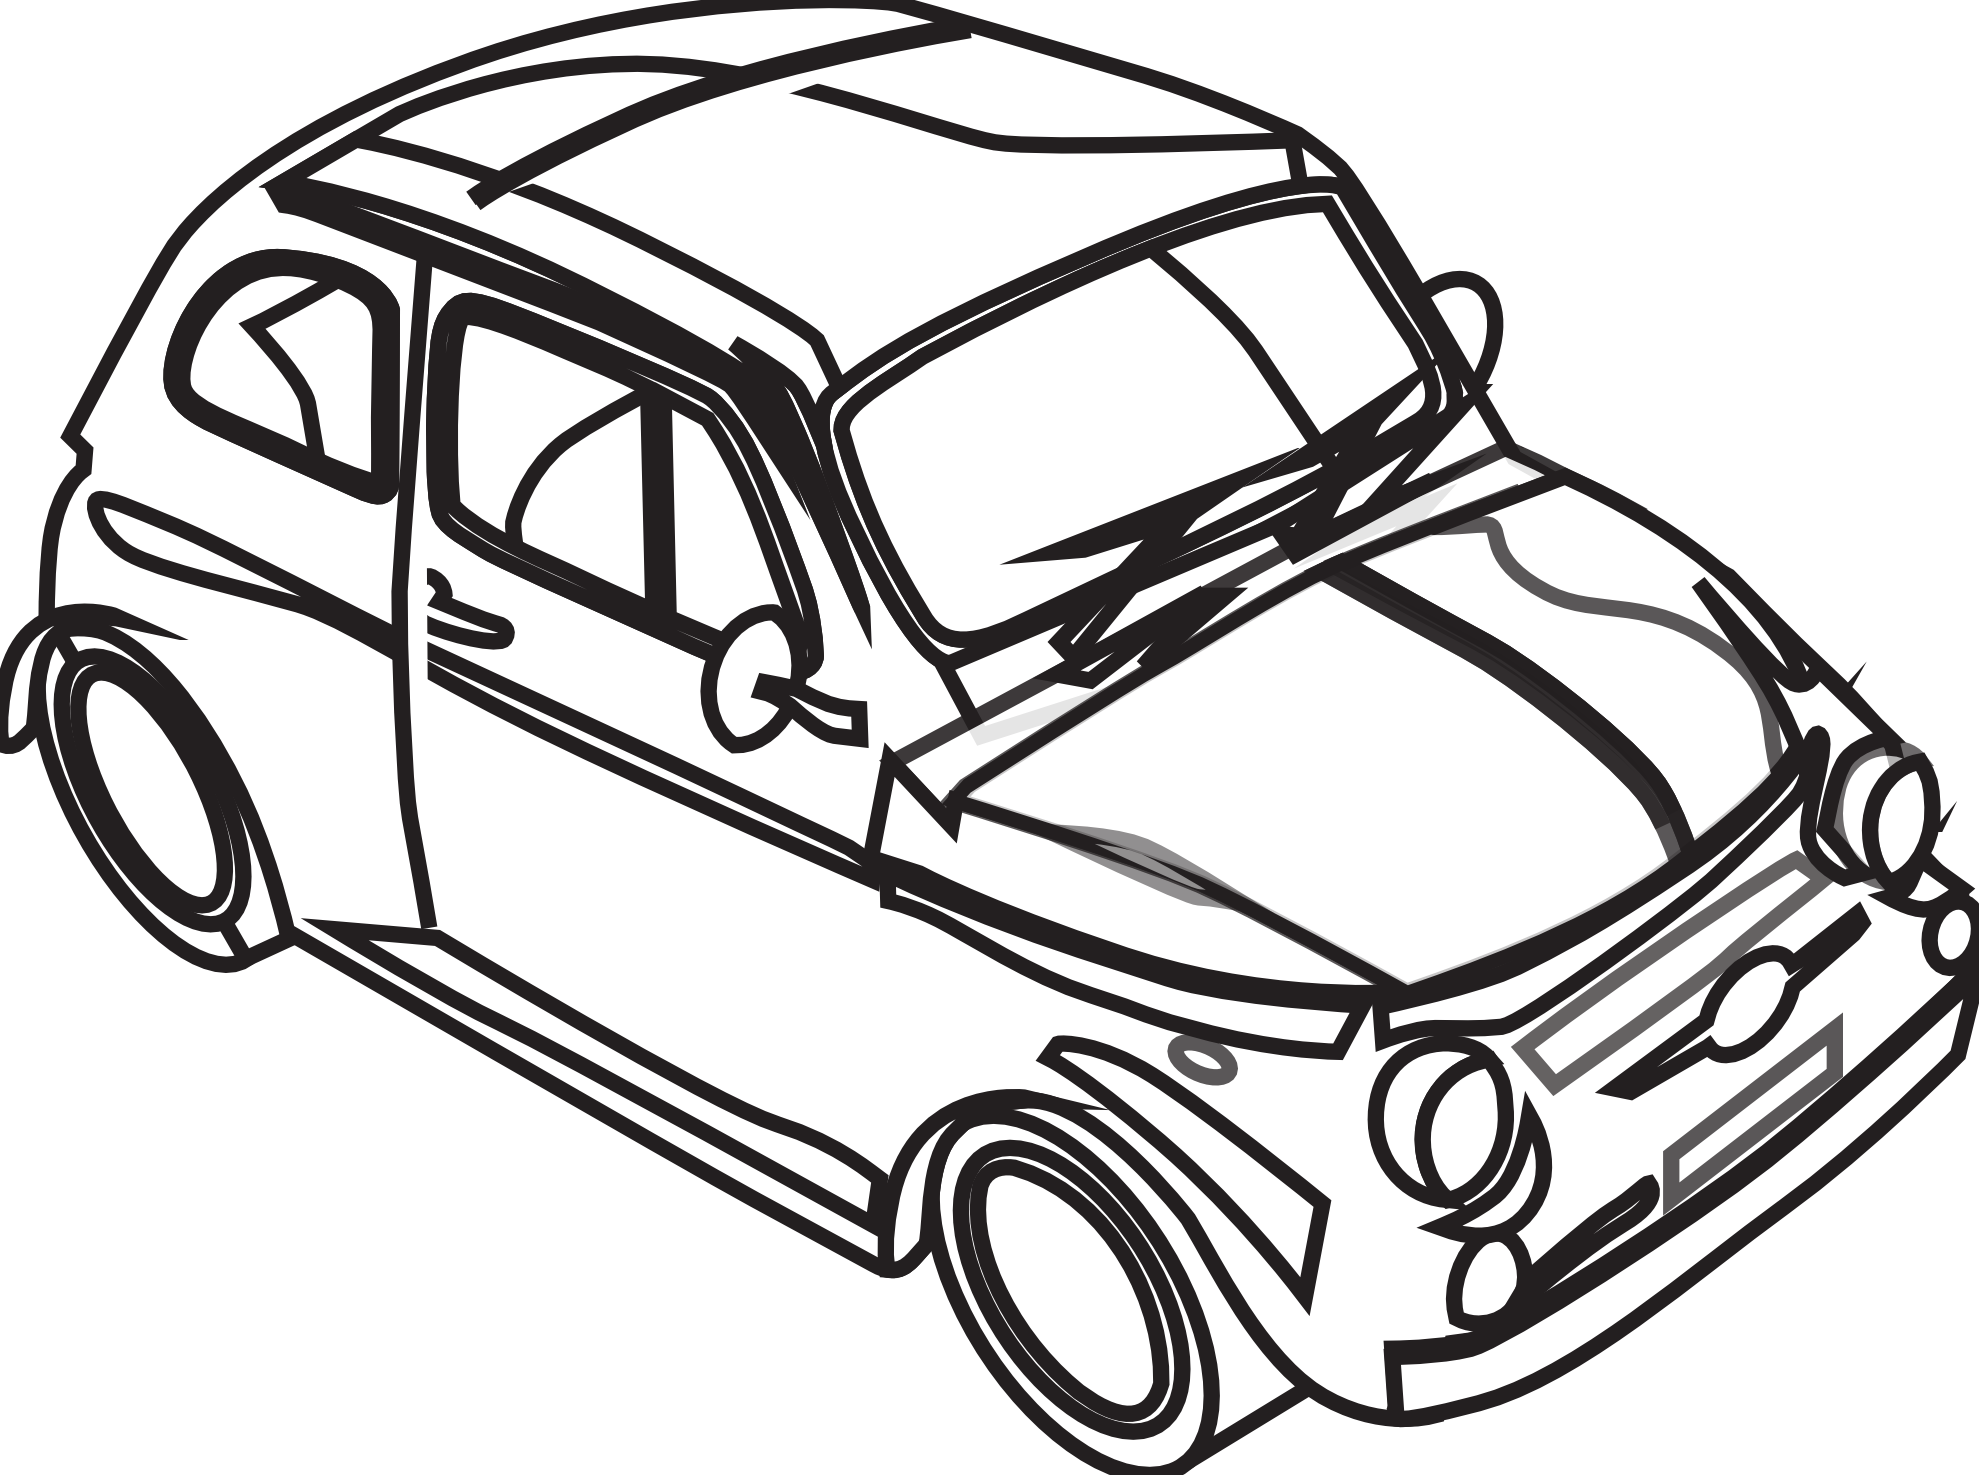 Car Clip Art Black And White | Clipart Panda - Free Clipart Images